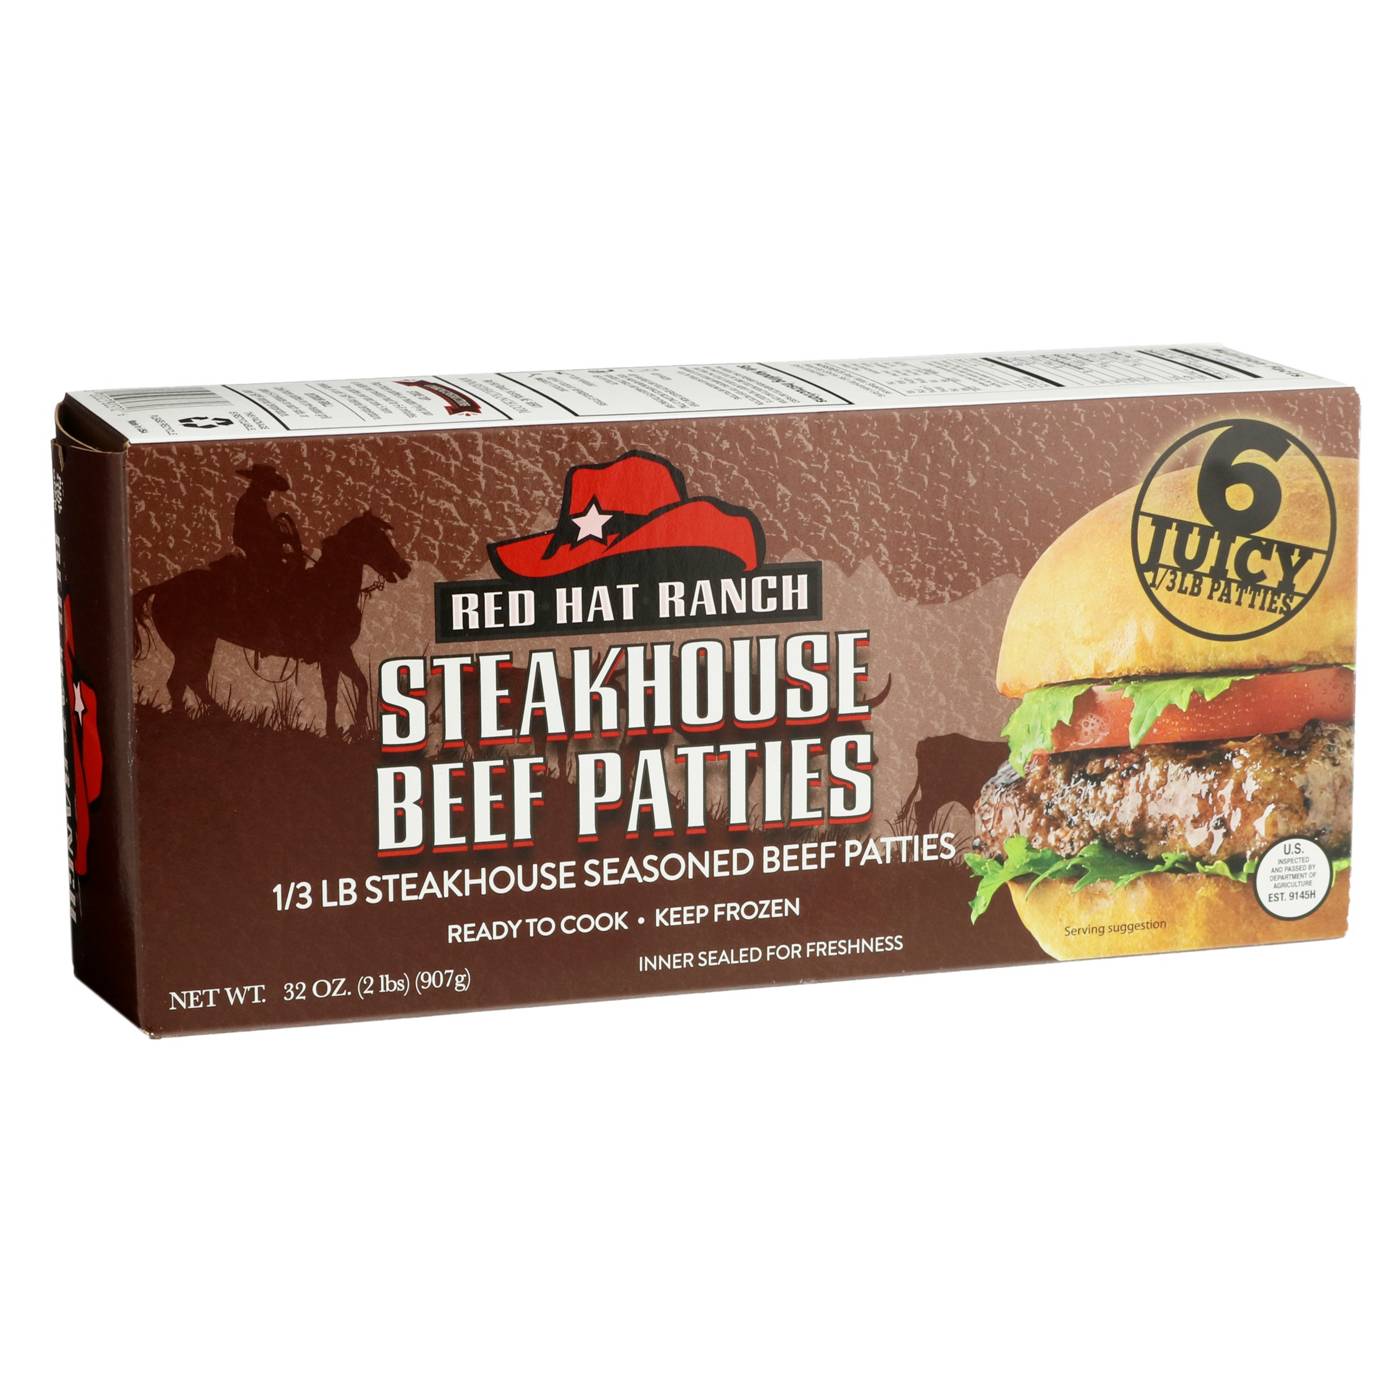 Red Hat Ranch Steakhouse Beef Patties; image 1 of 2